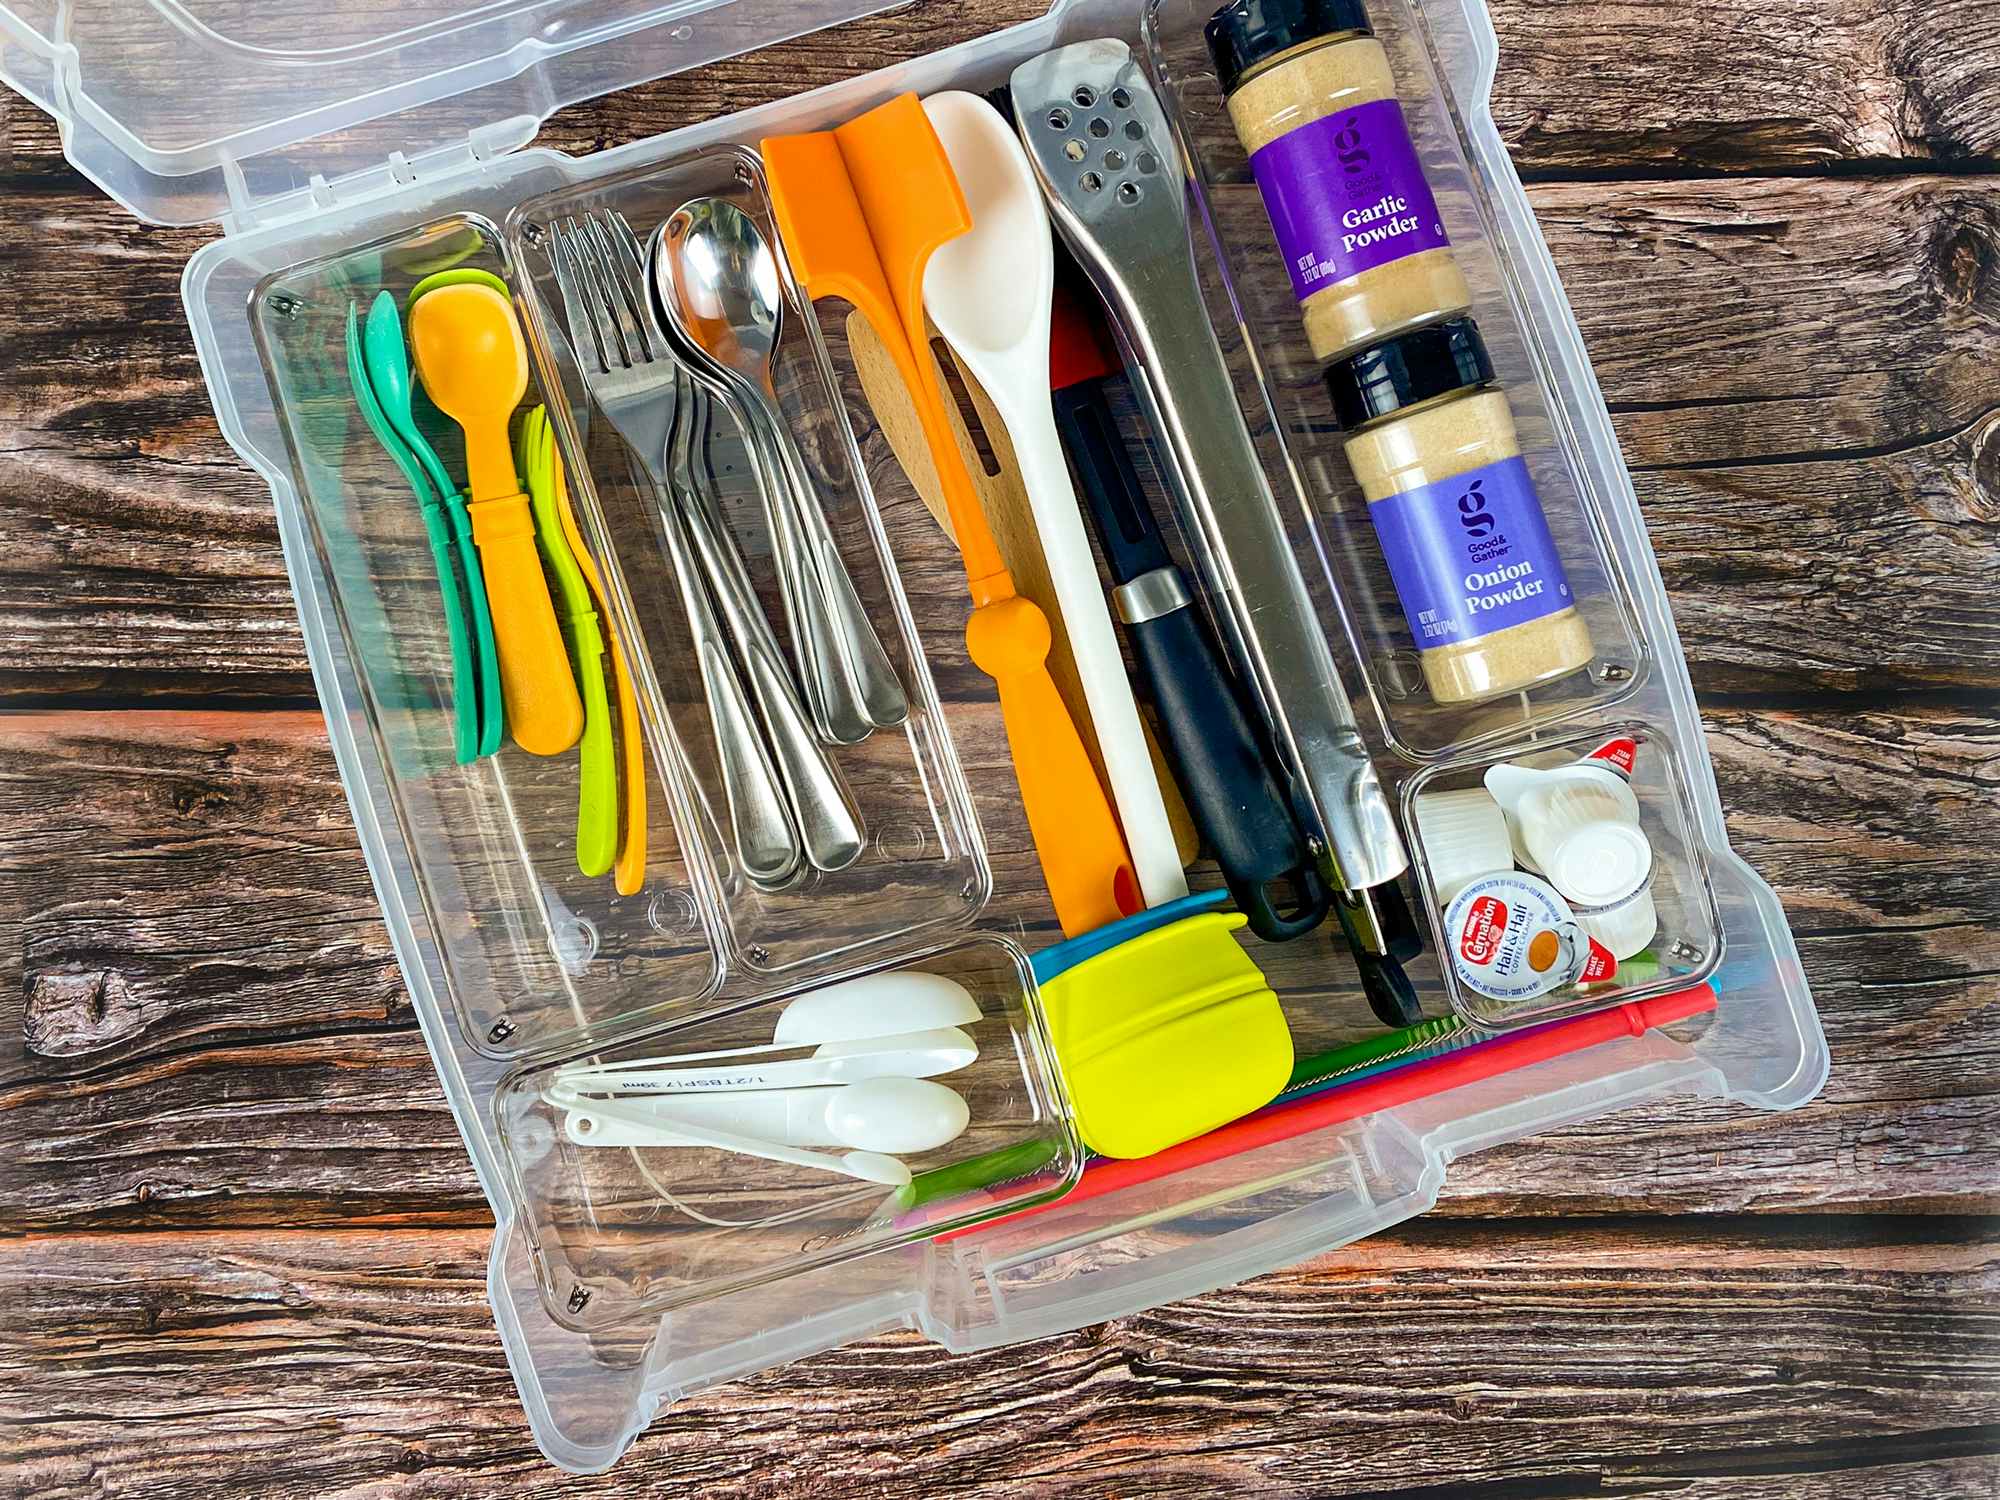 utensils in a craft organizer for camping